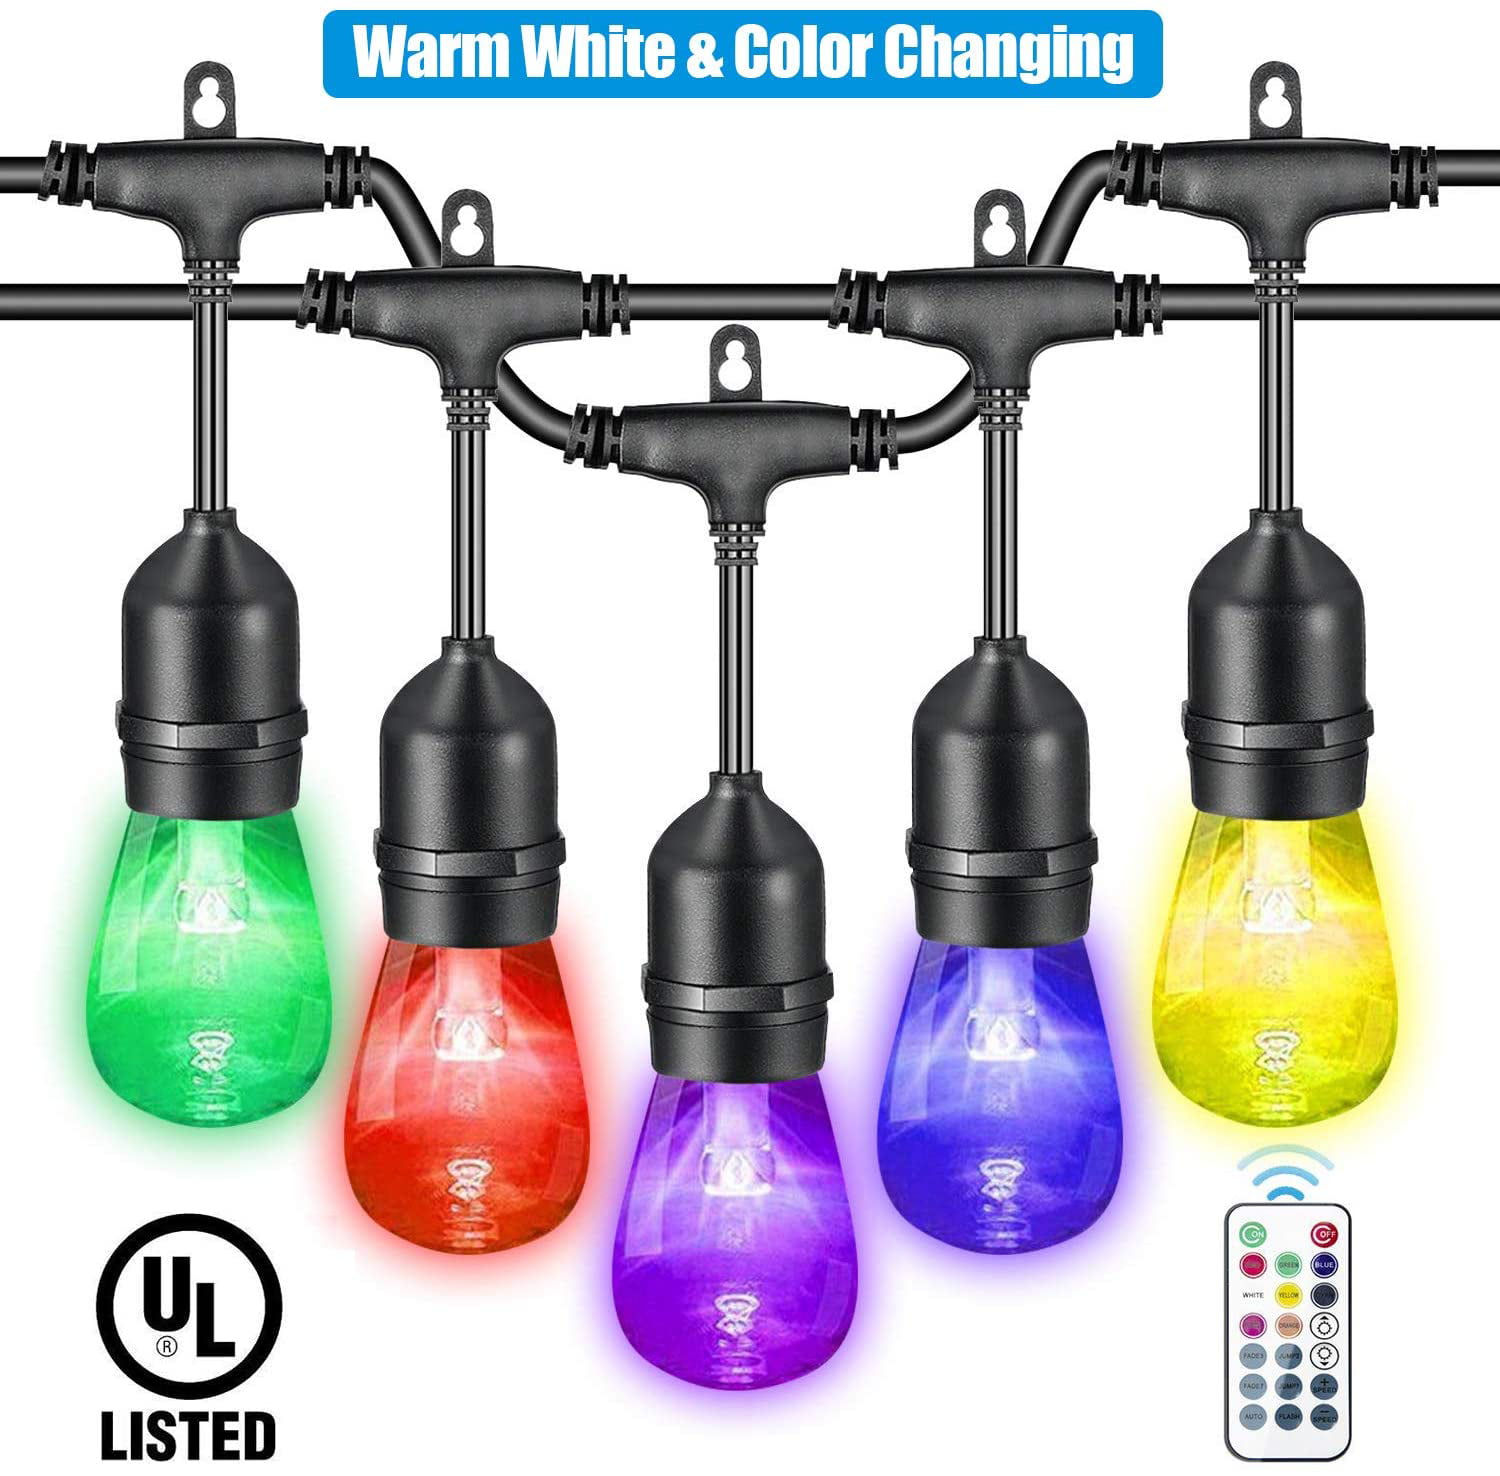 Dimmable LED Duty VAVOFO 48FT Warm White & Color Changing Outdoor String Lights 